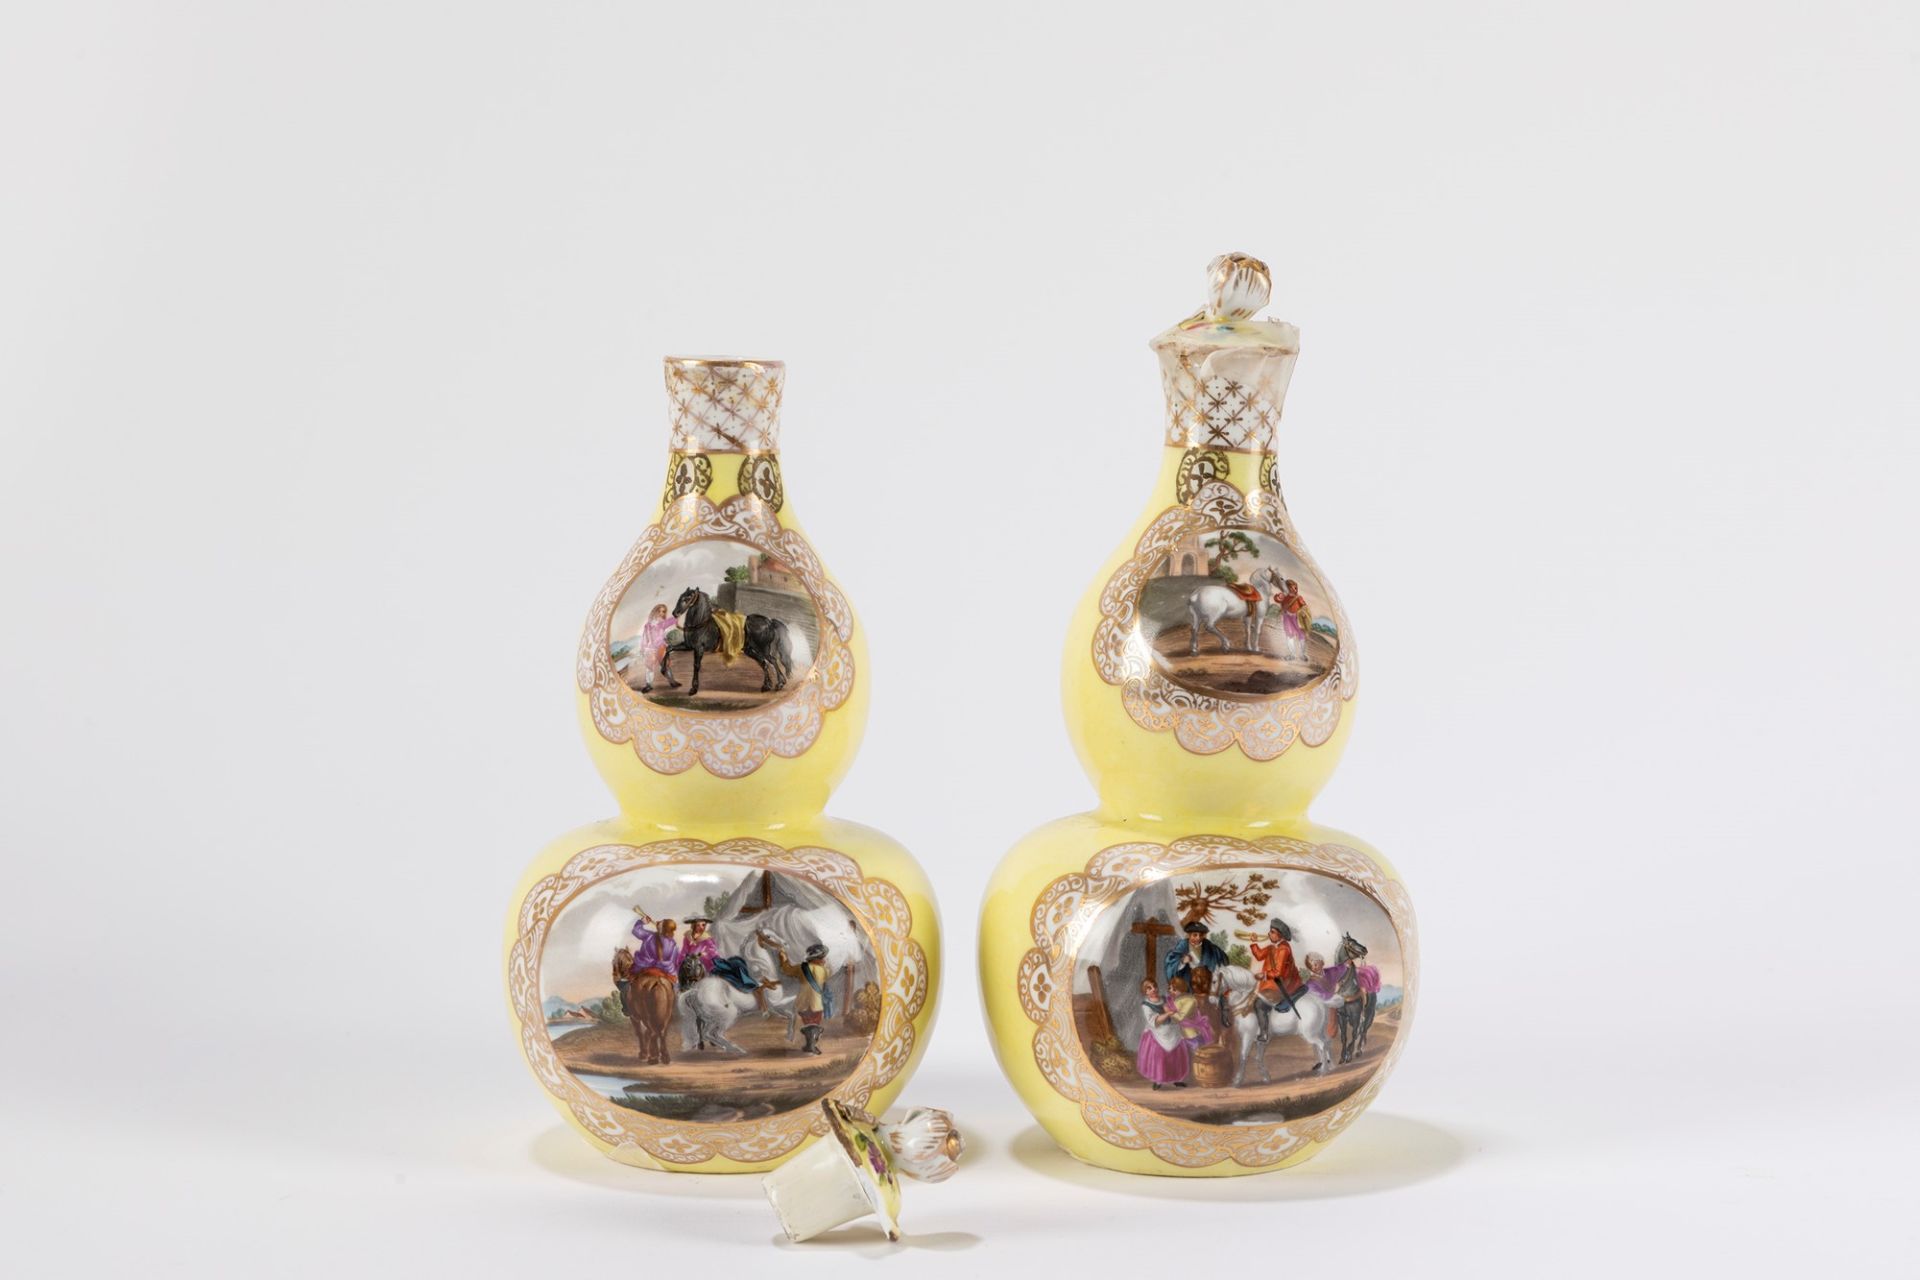 Pair of double gourd vases in yellow porcelain; early 20th century - Image 2 of 2